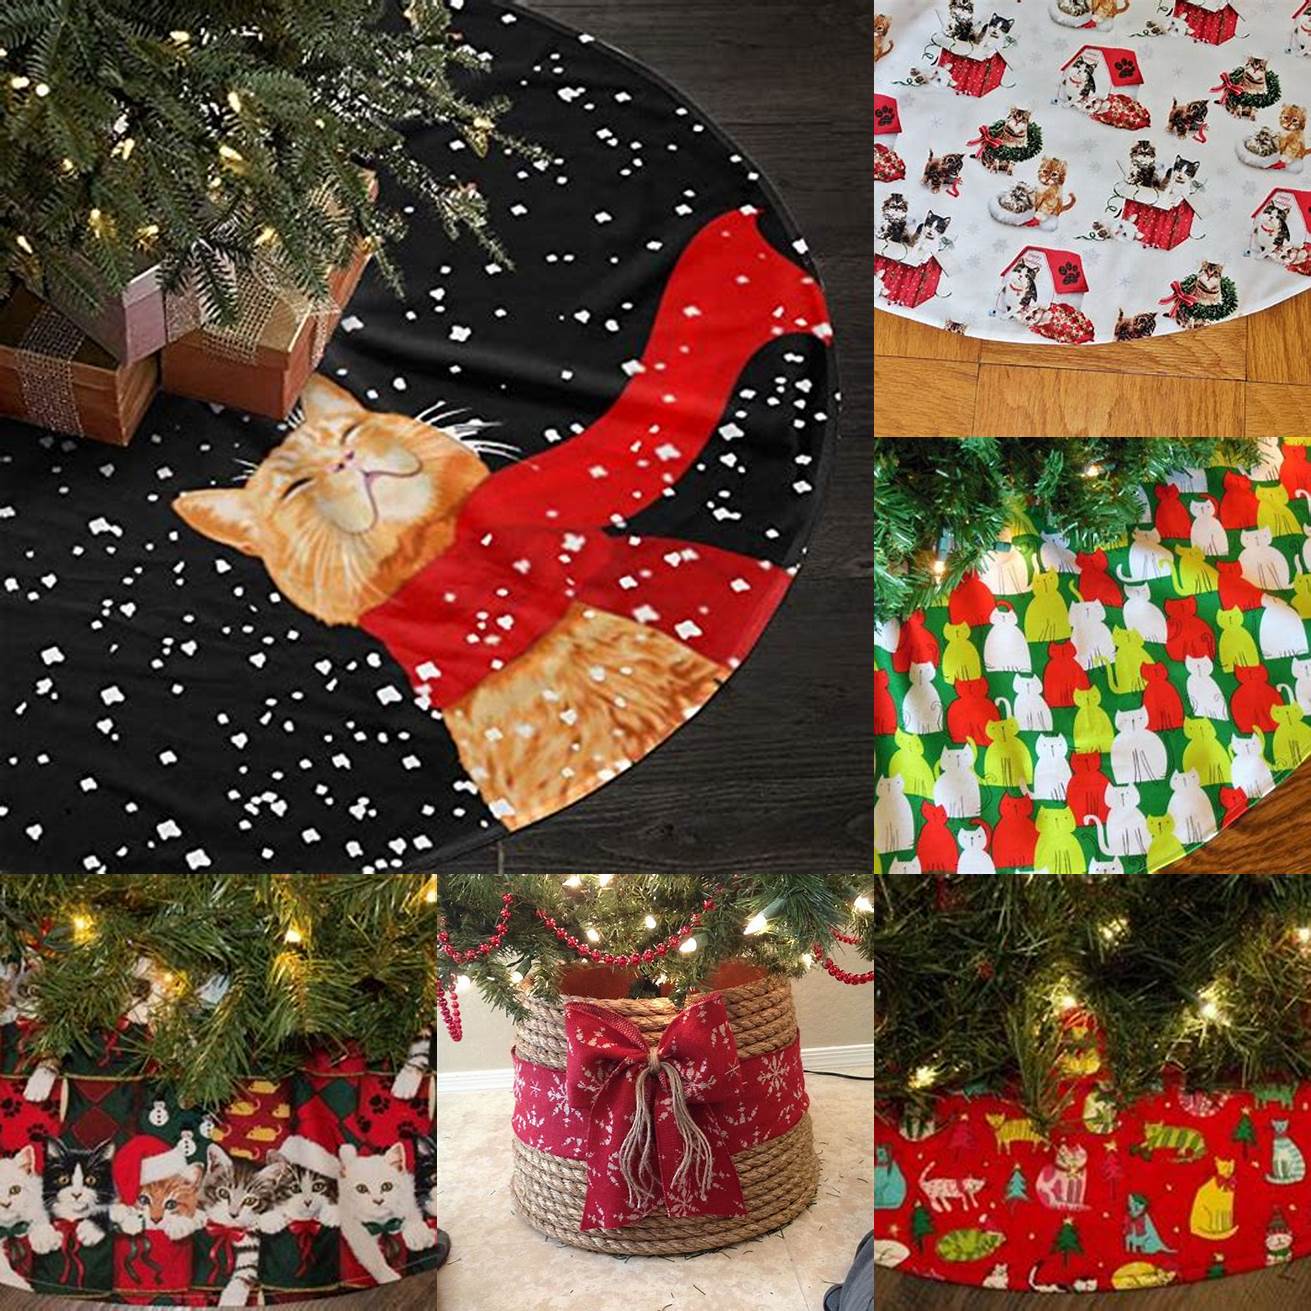 Use a tree skirt or cover